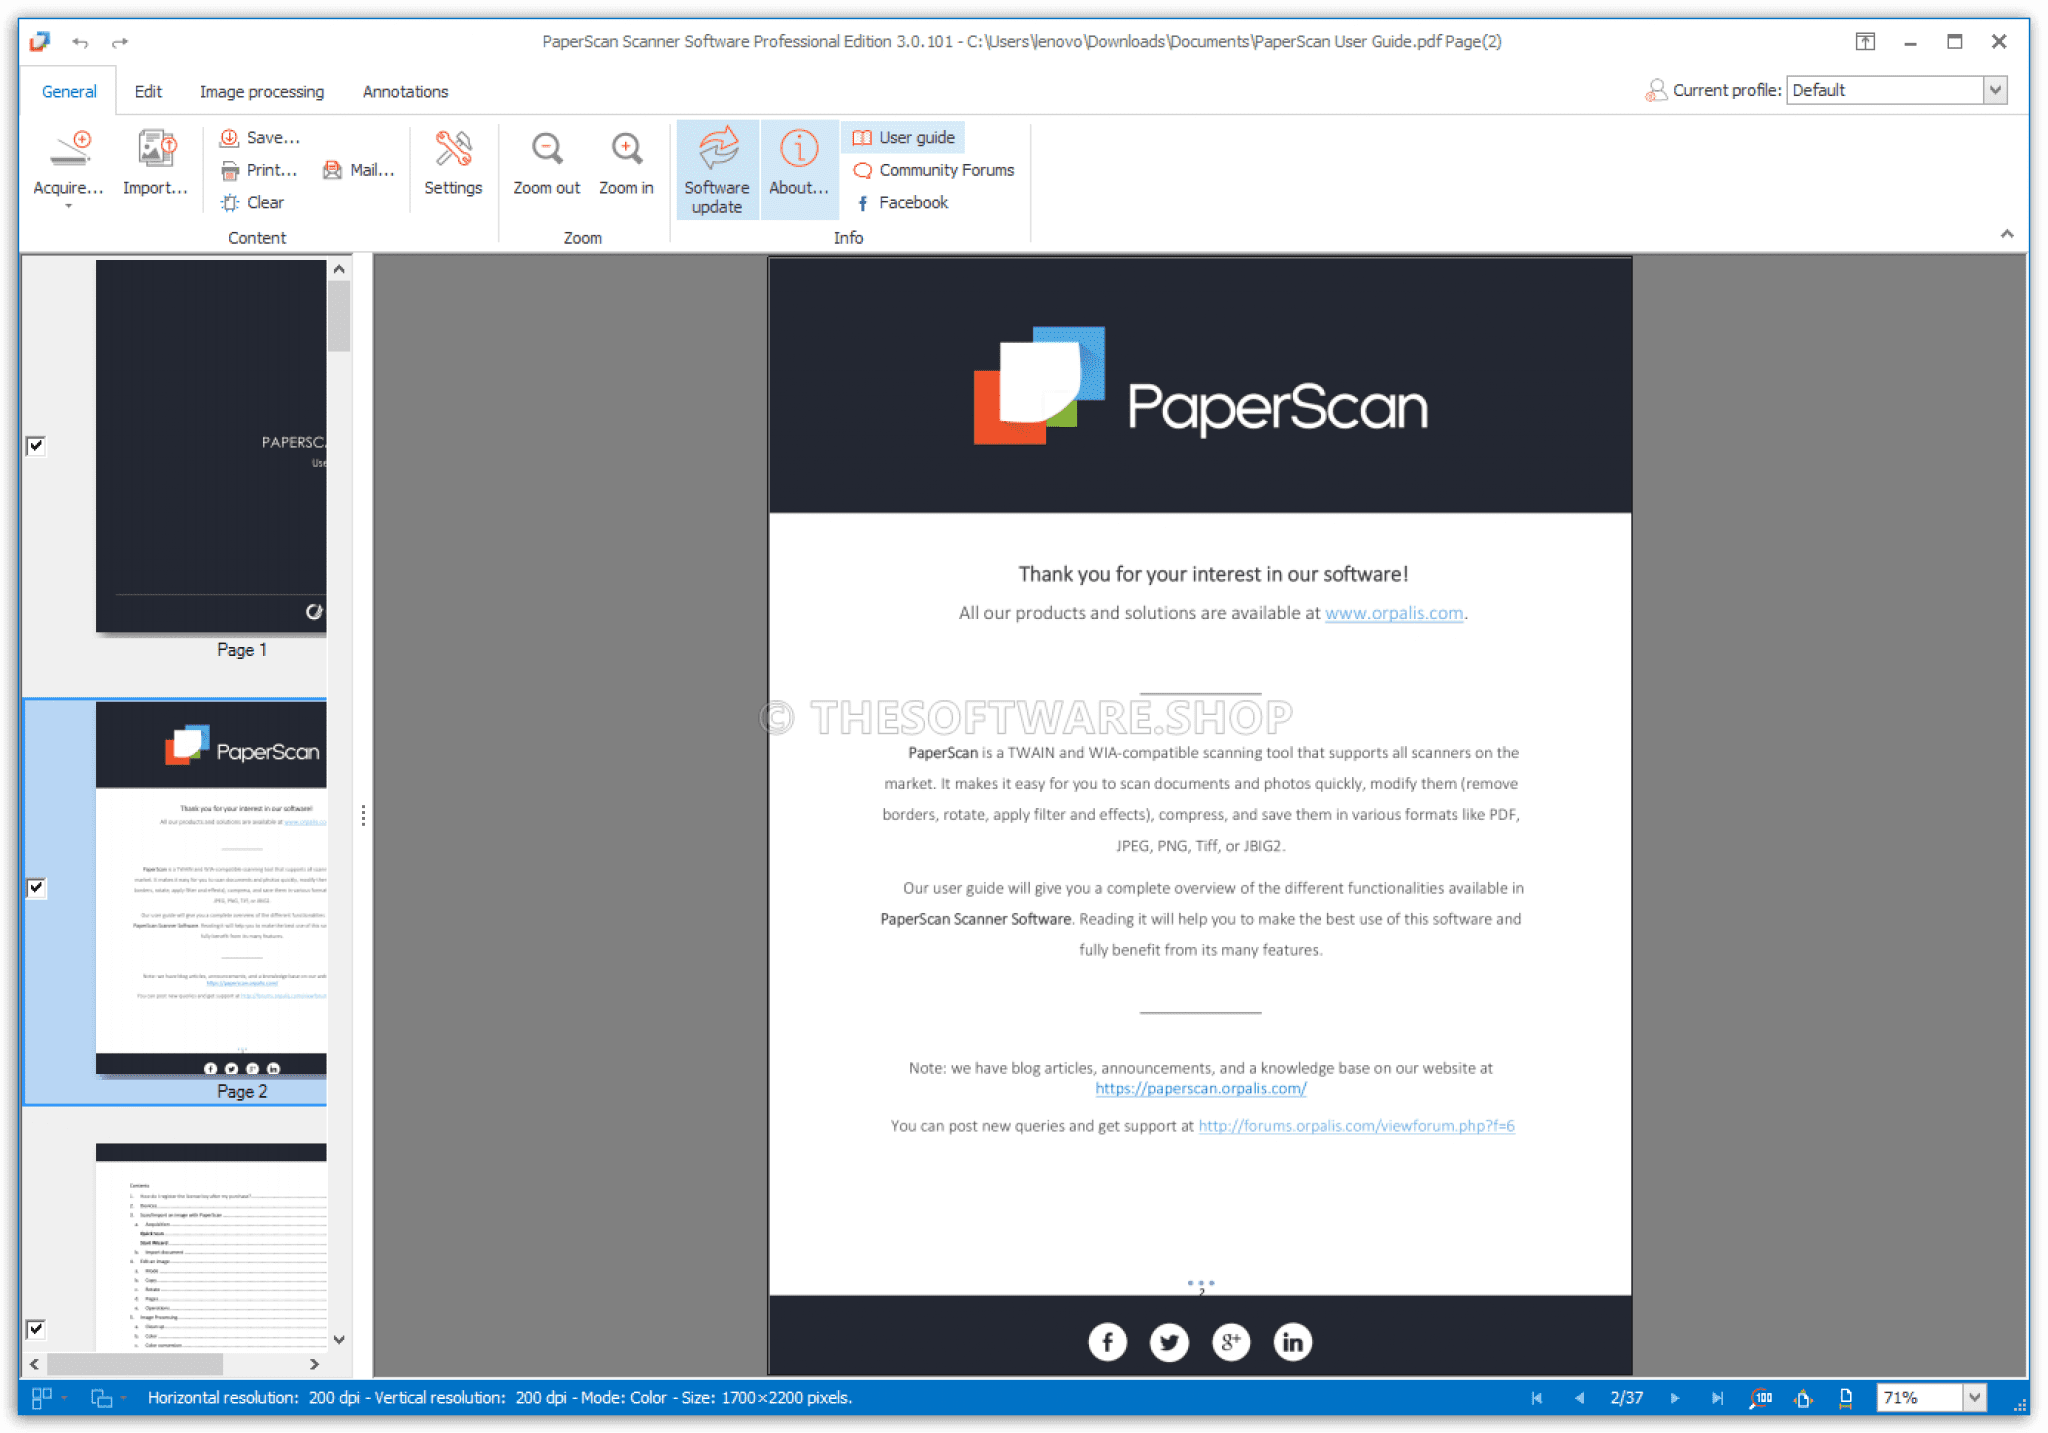 paperscan 3 professional edition